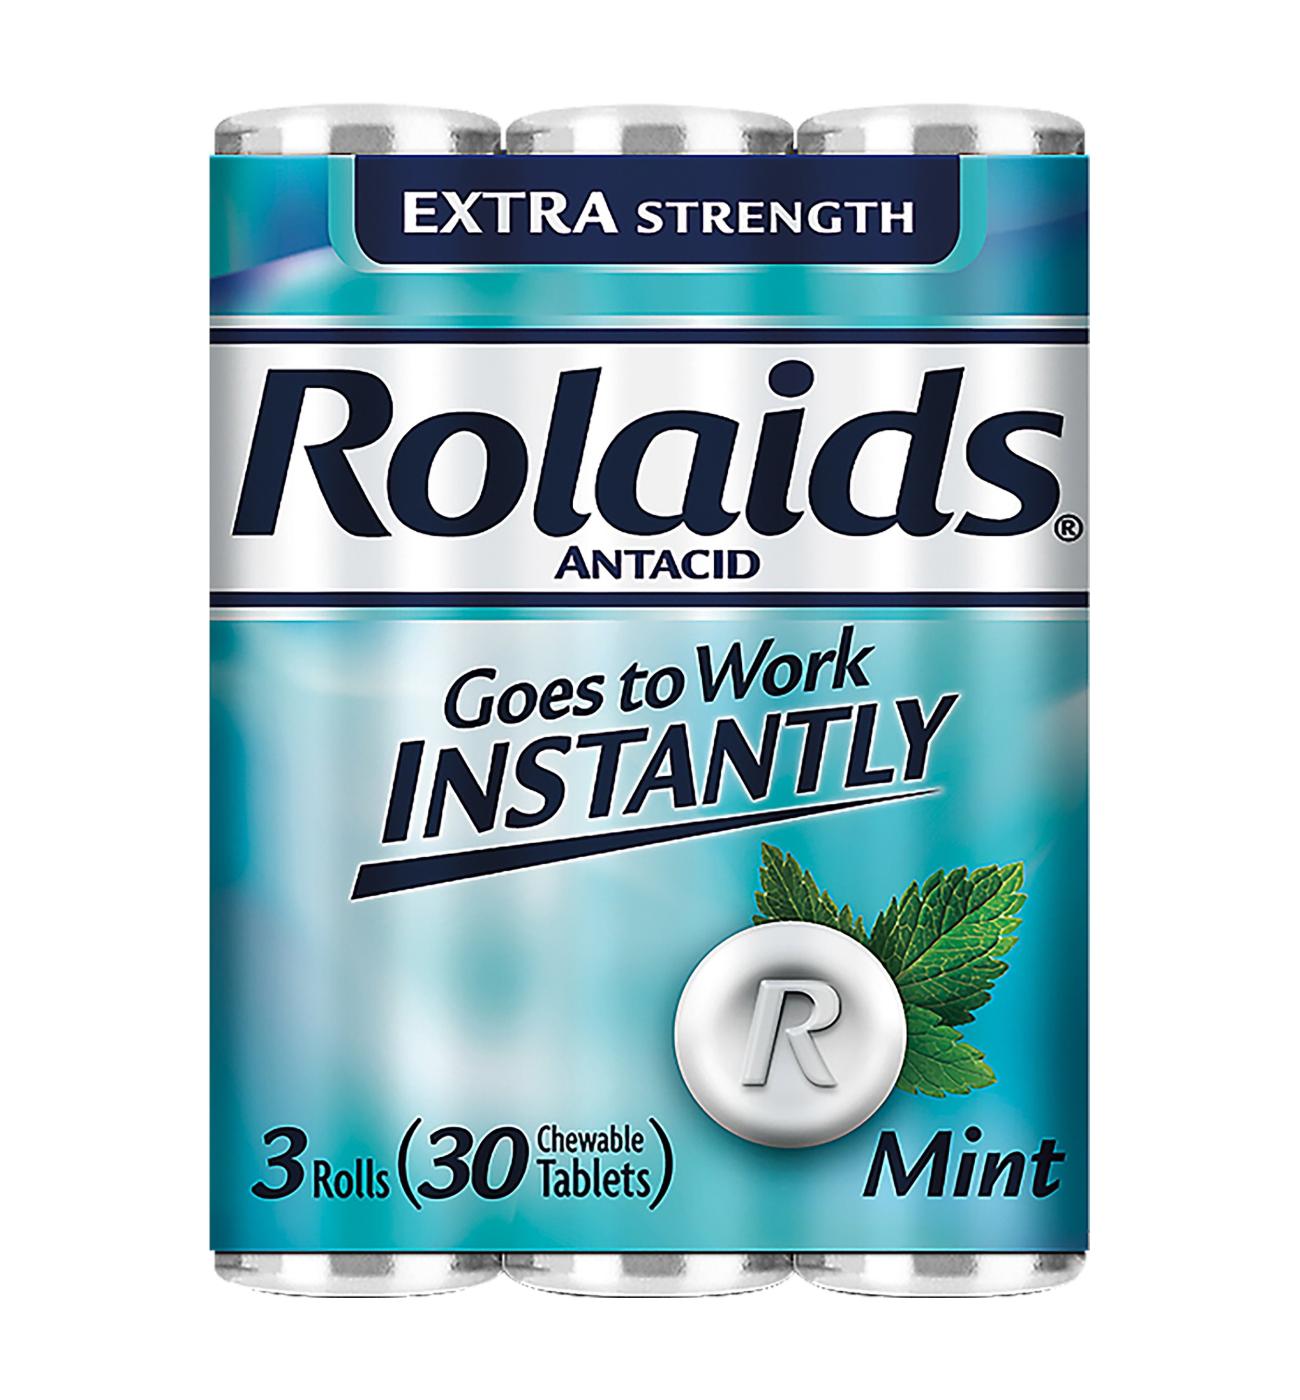 Rolaids 3 Roll Packs Extra Strength Tablets Mint; image 1 of 6